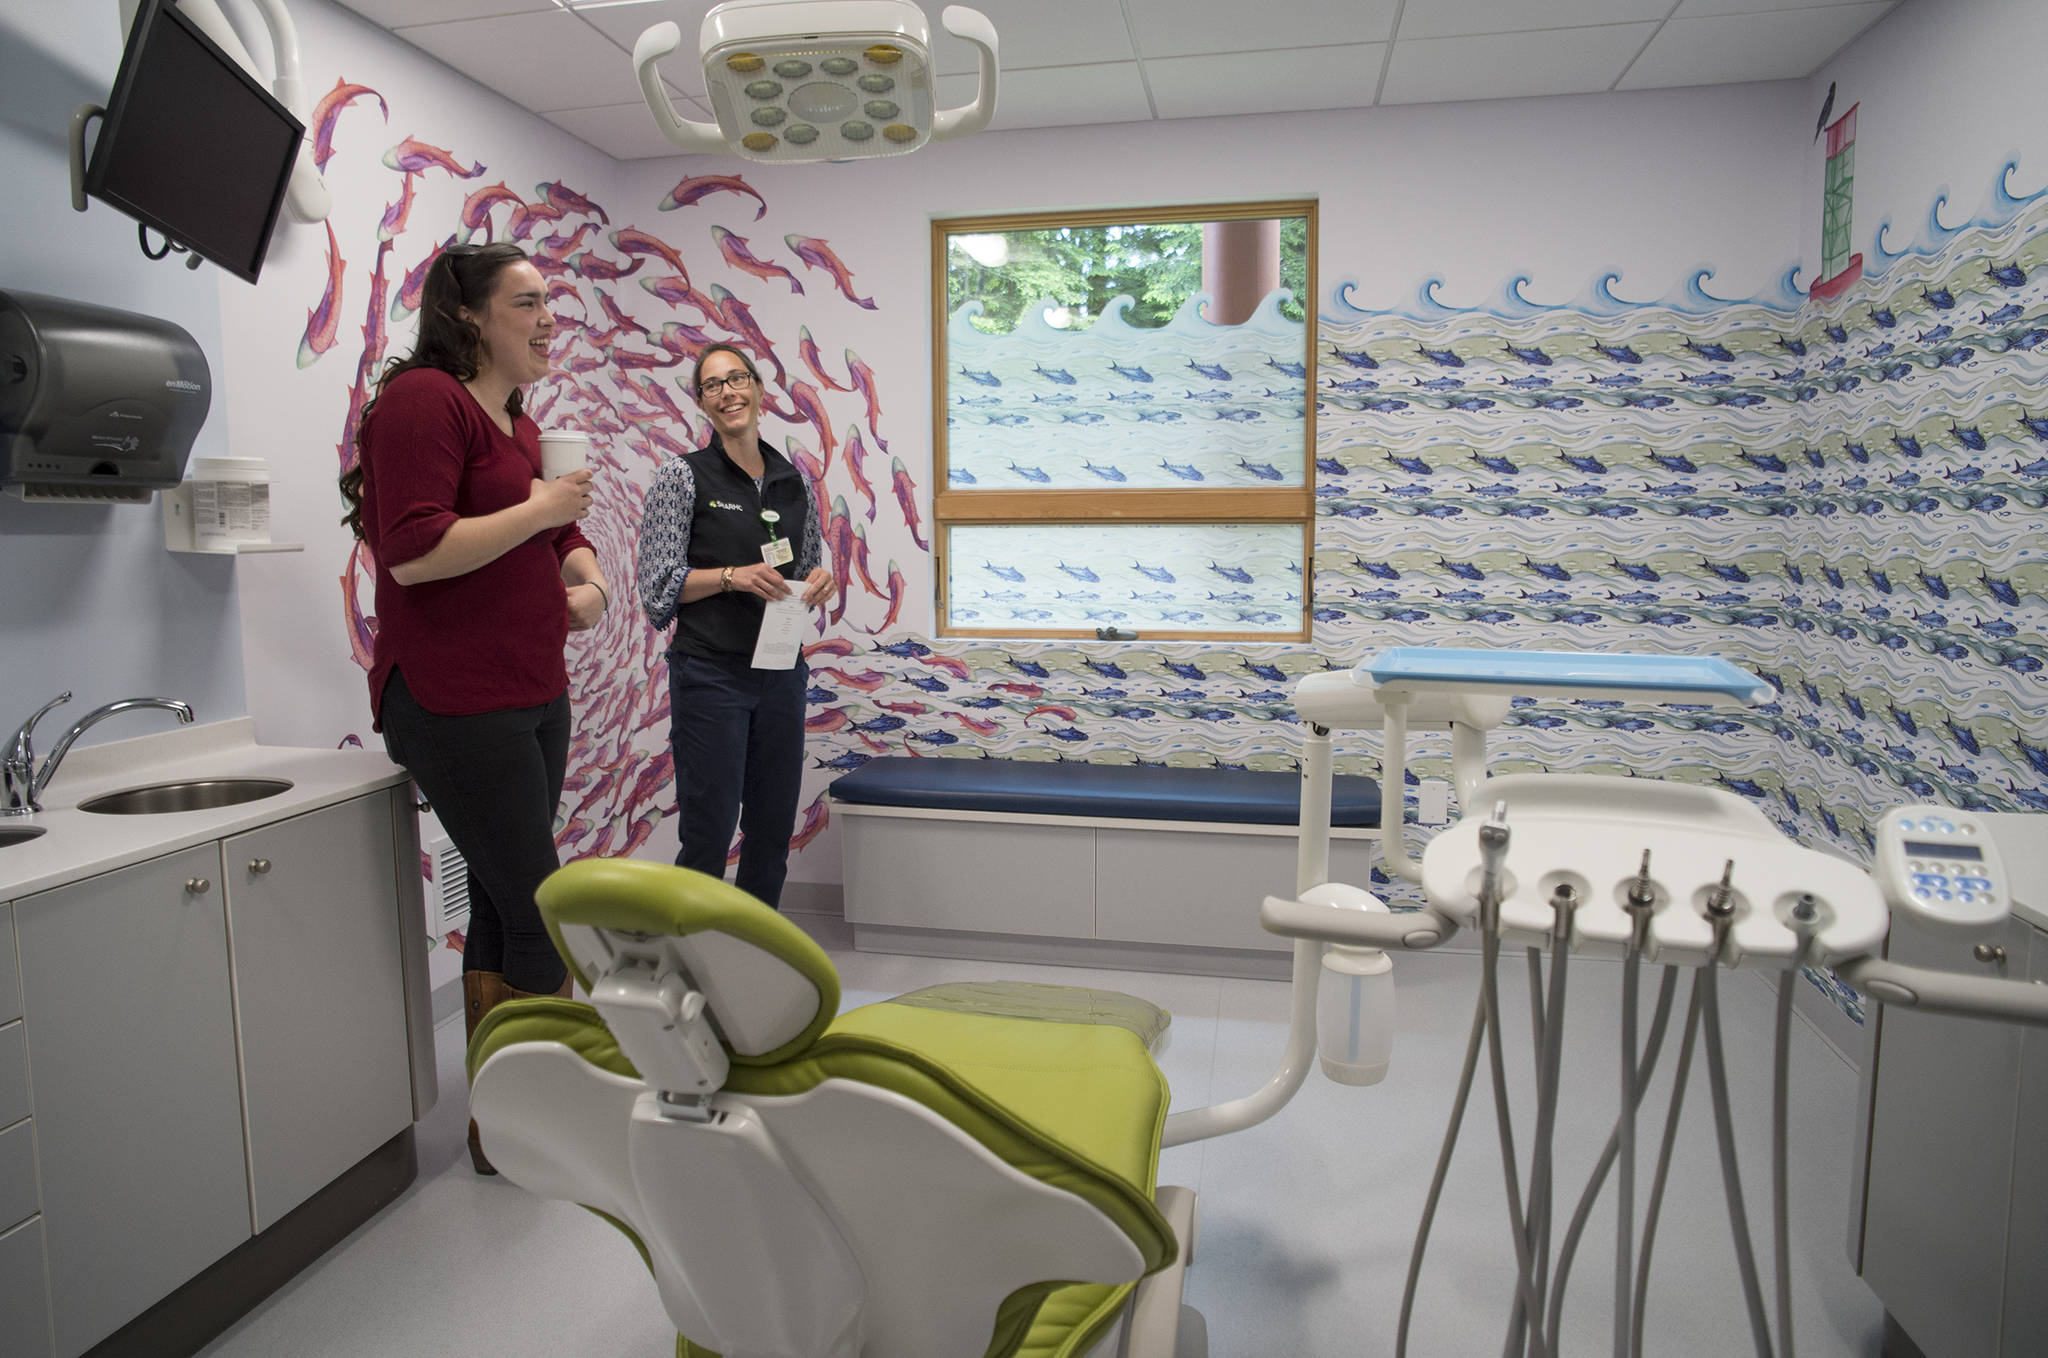 Case Manager Sydney Akagi, left, and Dr. Kim Hort, Pediatric Dentist Manager, admire one of the rooms in the SouthEast Alaska Regional Health Consortium’s new Children’s Dental Clinic during a Grand Opening on Thursday, June 22, 2017. Agaki’s watercolor paintings were use to decorate all the rooms in the clinic. (Michael Penn | Juneau Empire)